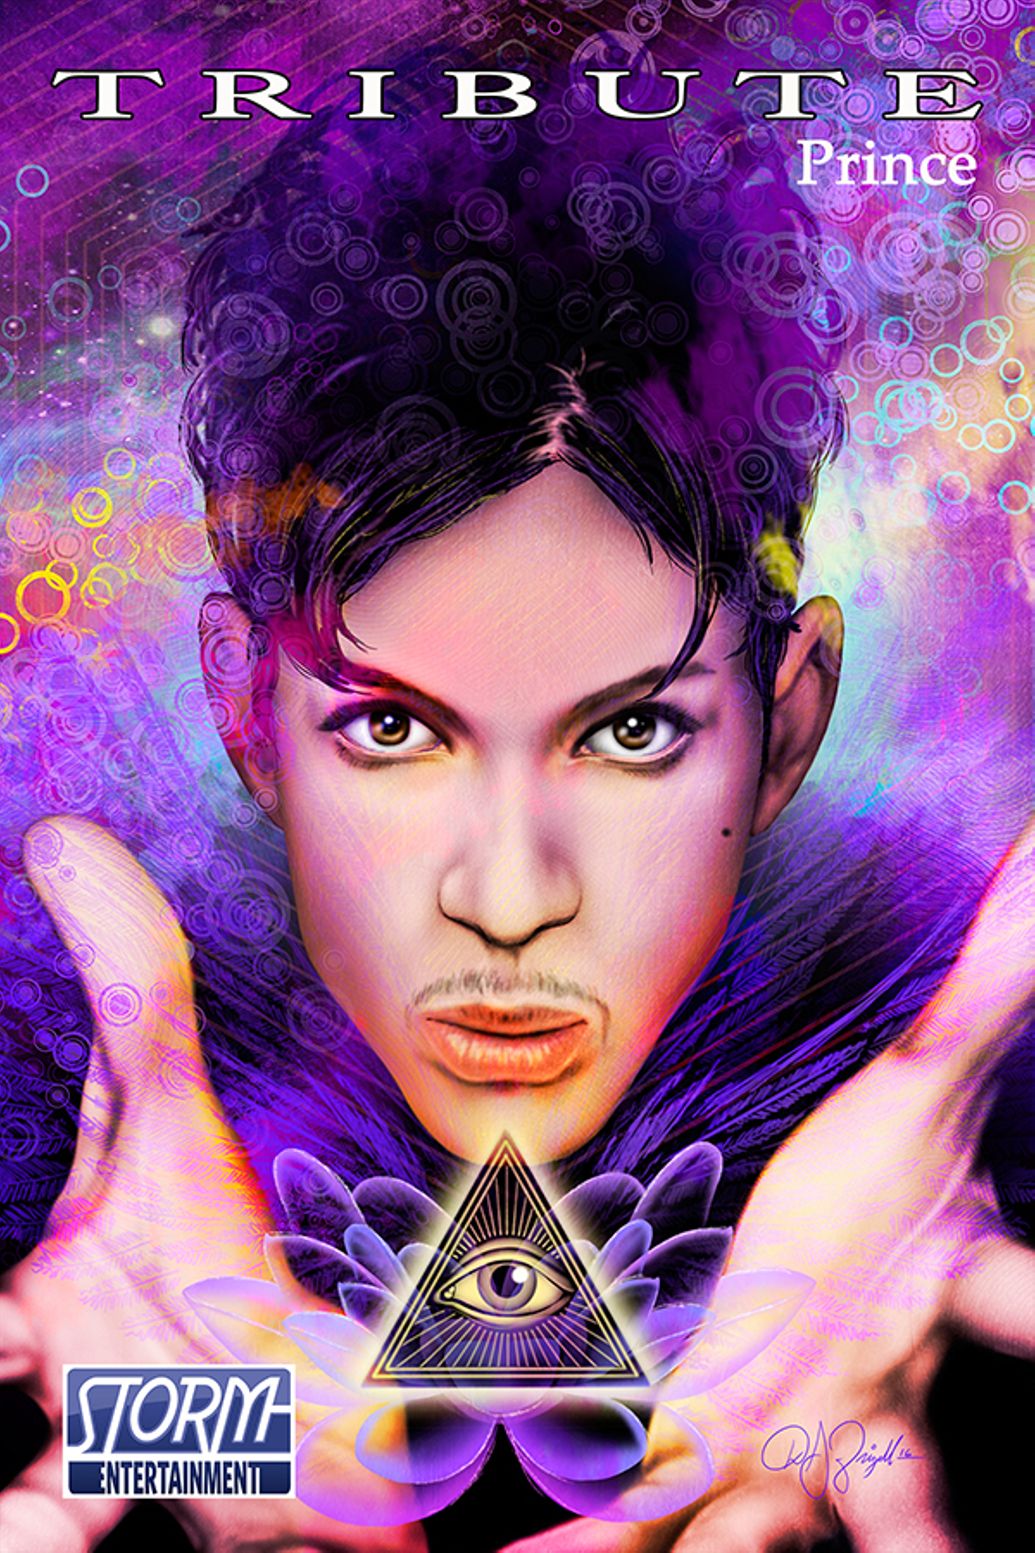 Tribute: Prince comic book, released on the late singer’s birthday, June 7th